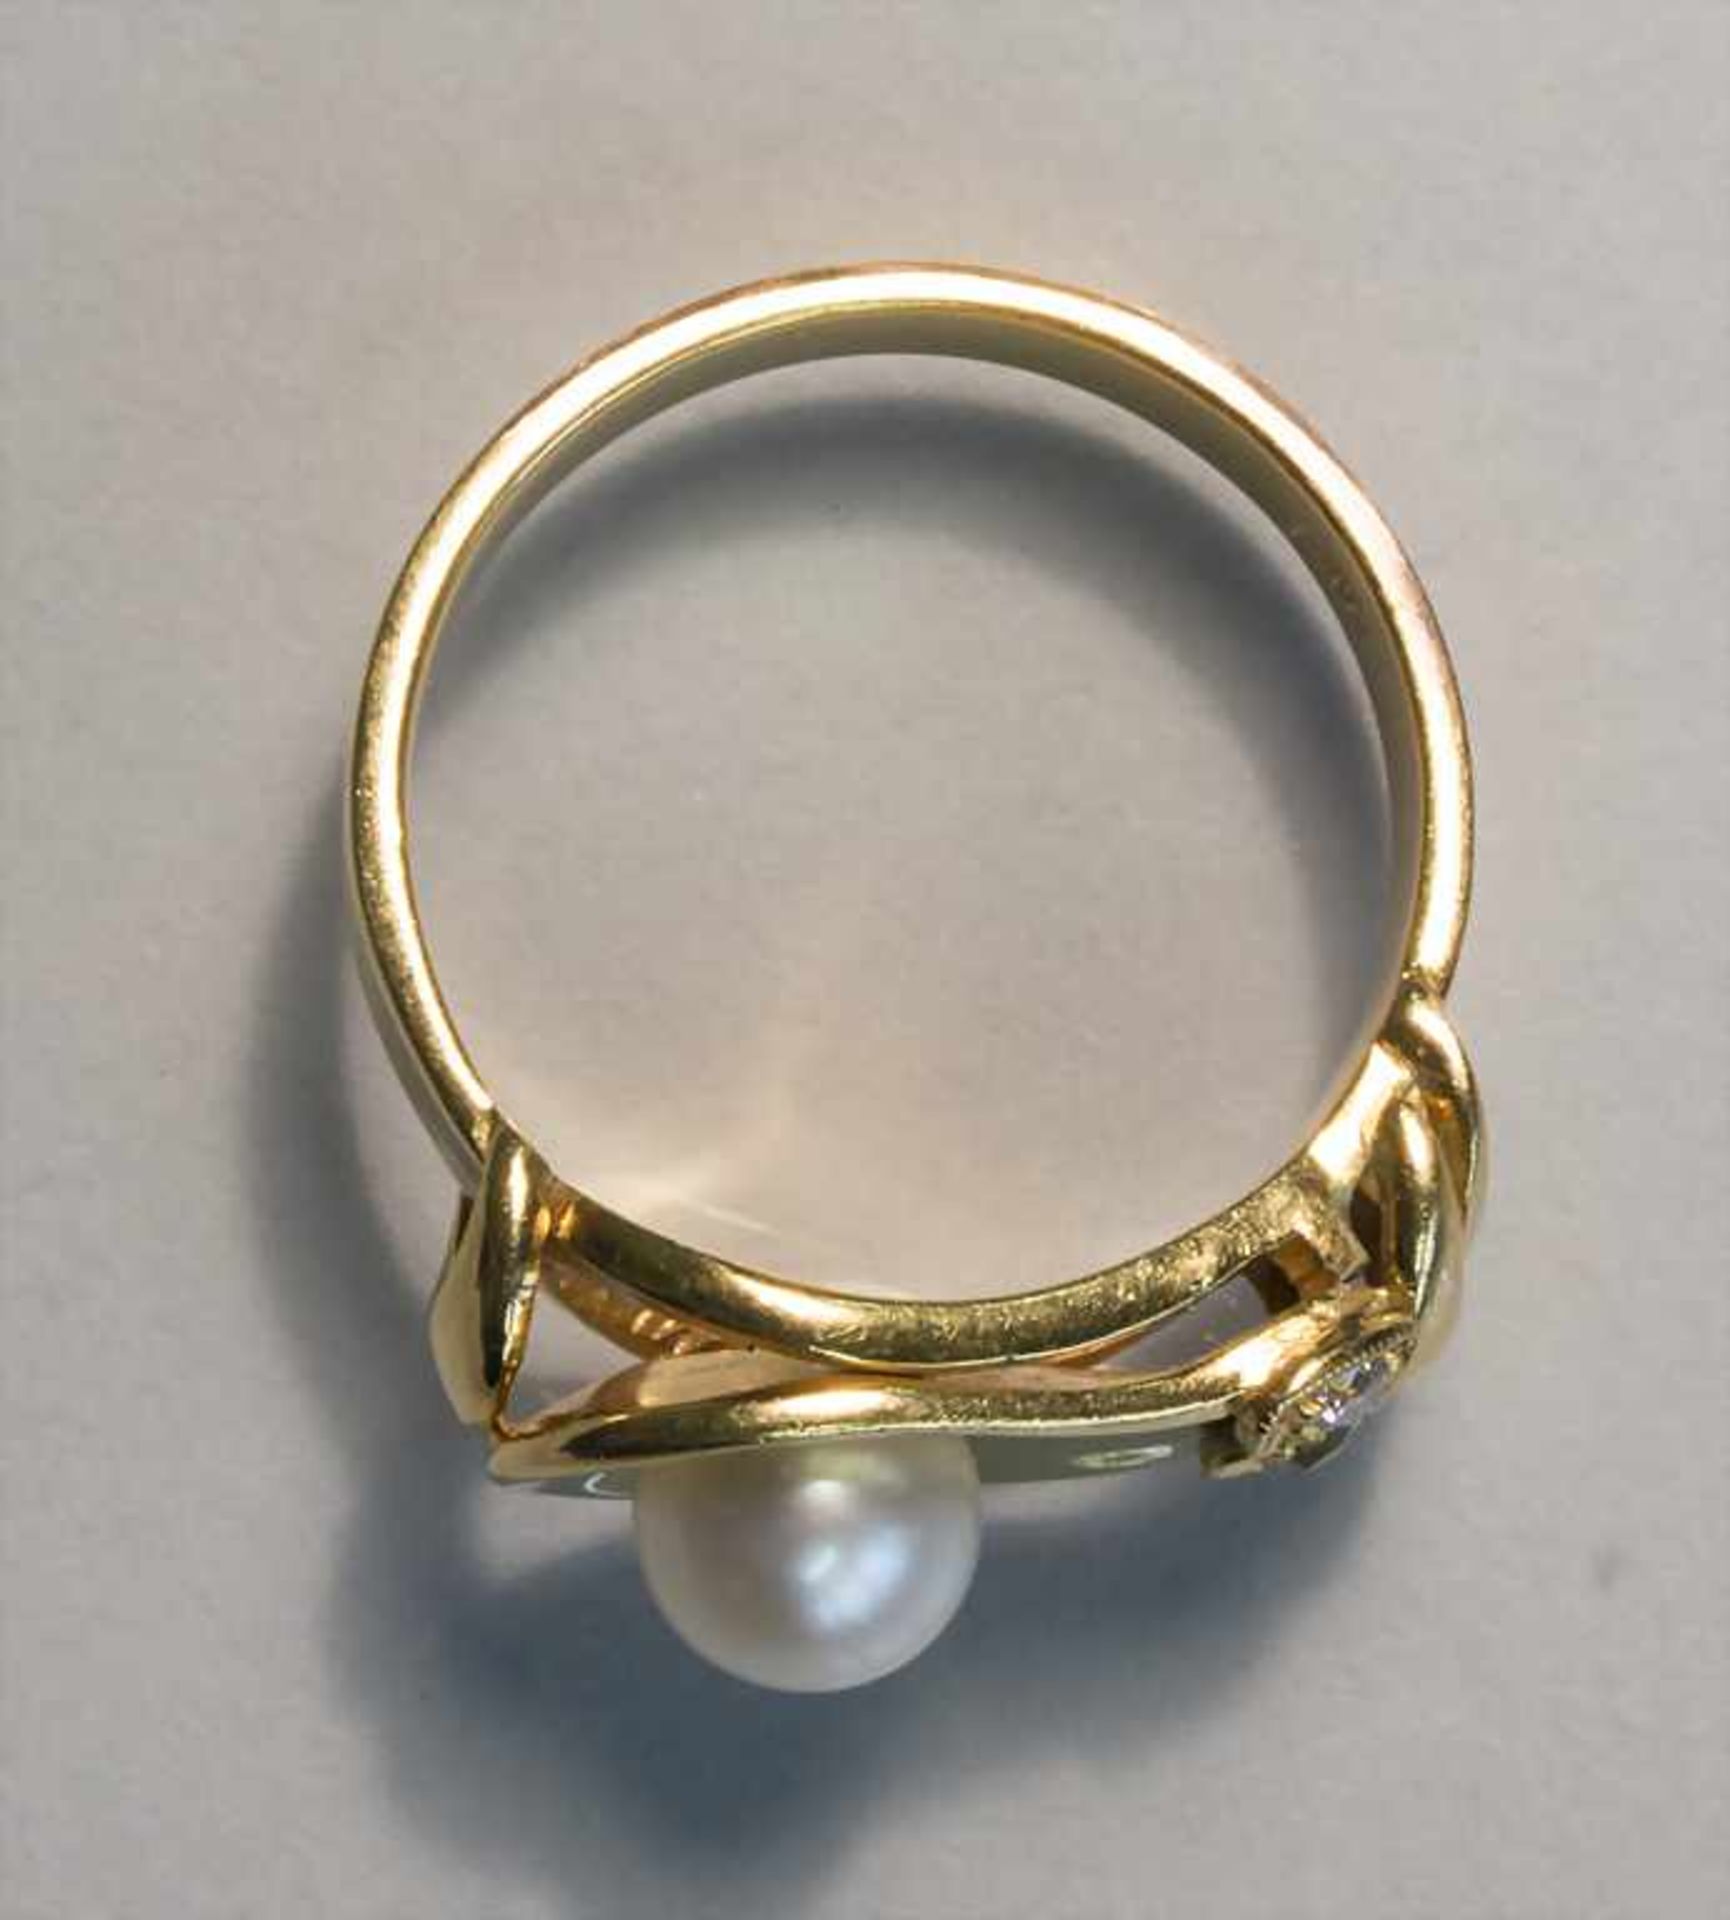 Damenring mit Perle und Diamanten / A ladies ring with a pearl and diamonds - Image 3 of 3